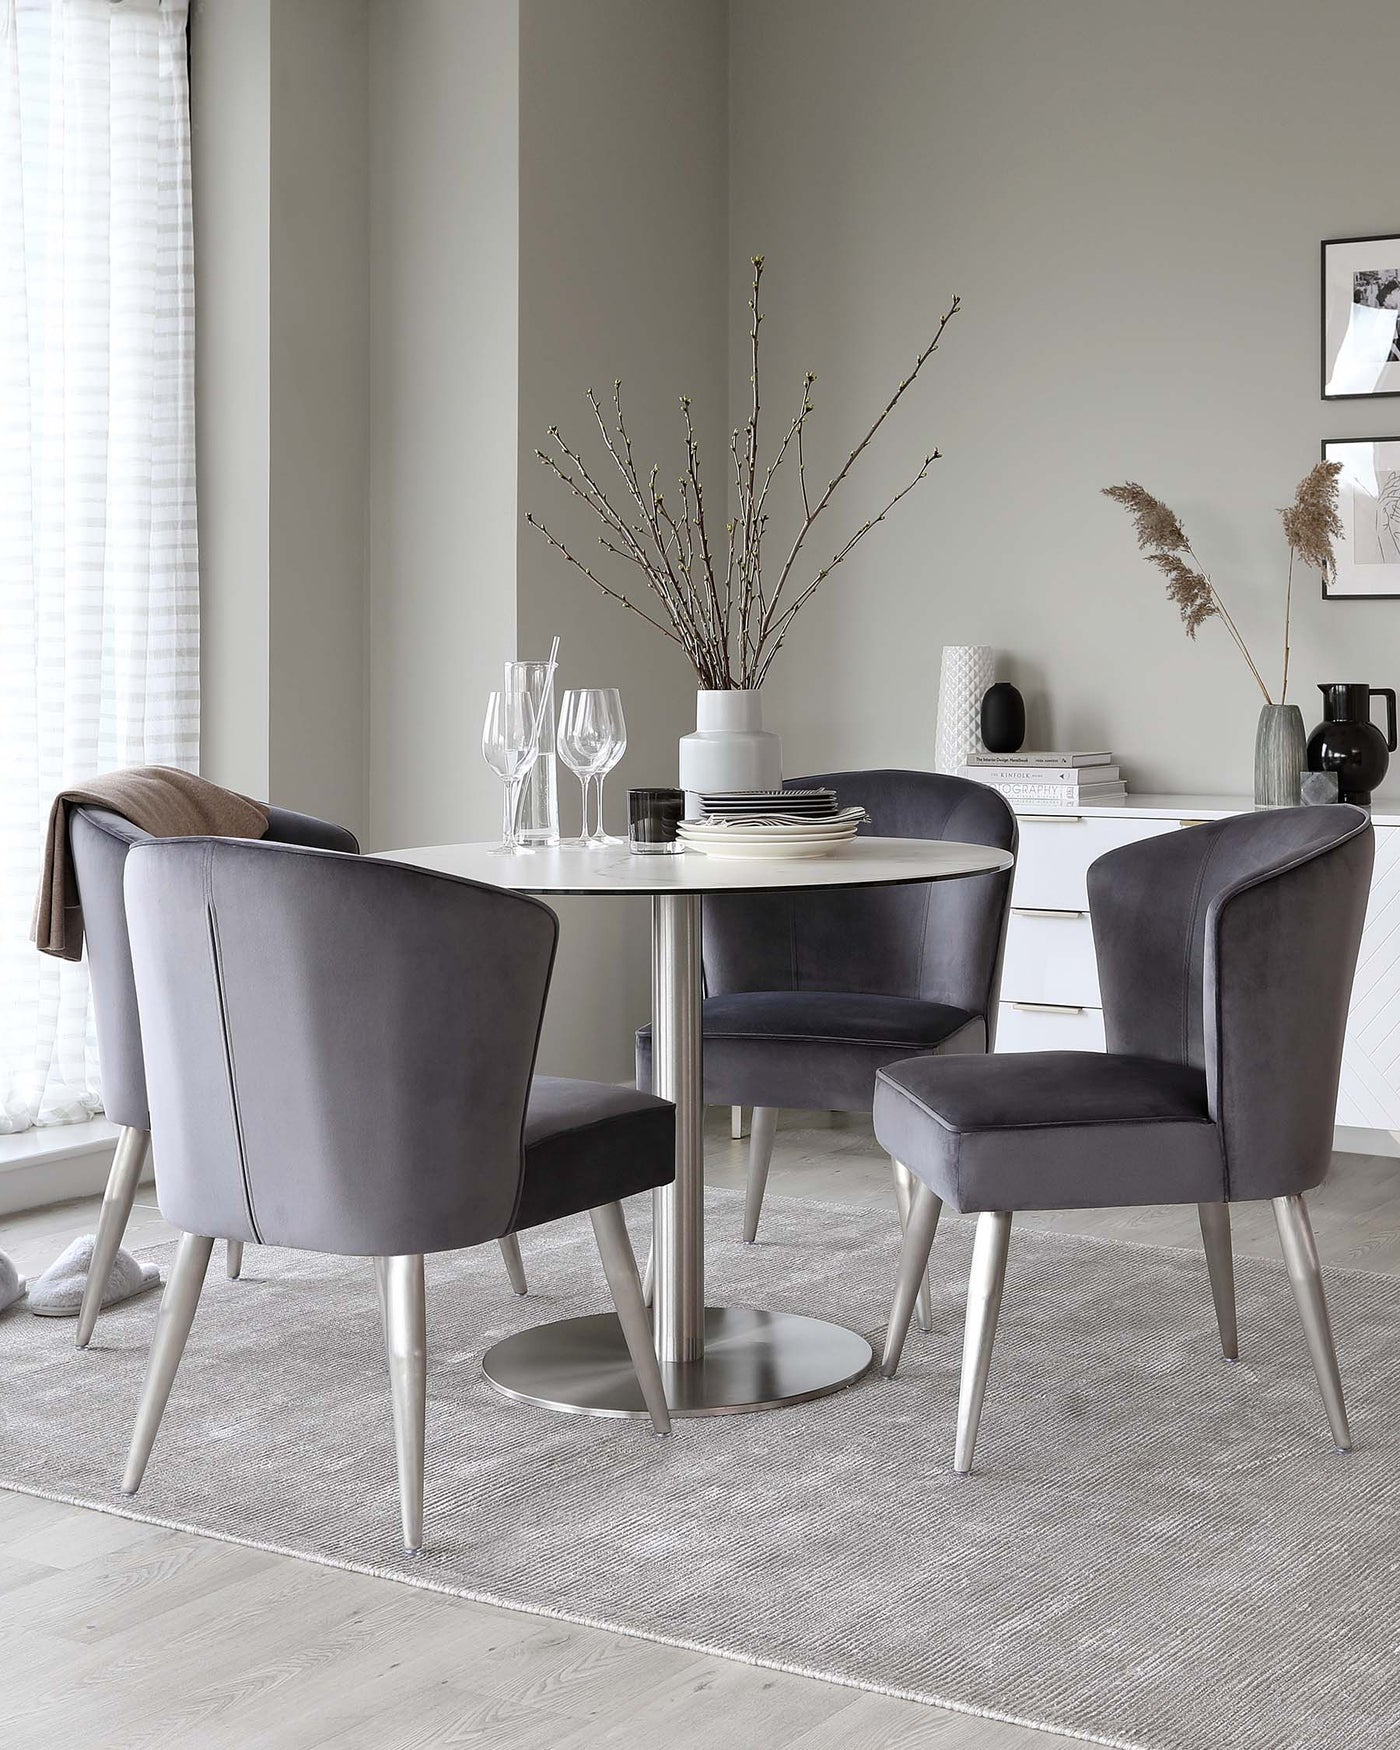 Modern dining room set with a round, chrome-legged table with a glossy finish and four plush, curved-back charcoal-grey chairs with tapered metal legs. The table is set with simple, elegant tableware and decorated with a vase of tall branches. A textured area rug underlies the setup, enhancing the sophisticated, contemporary feel of the space.